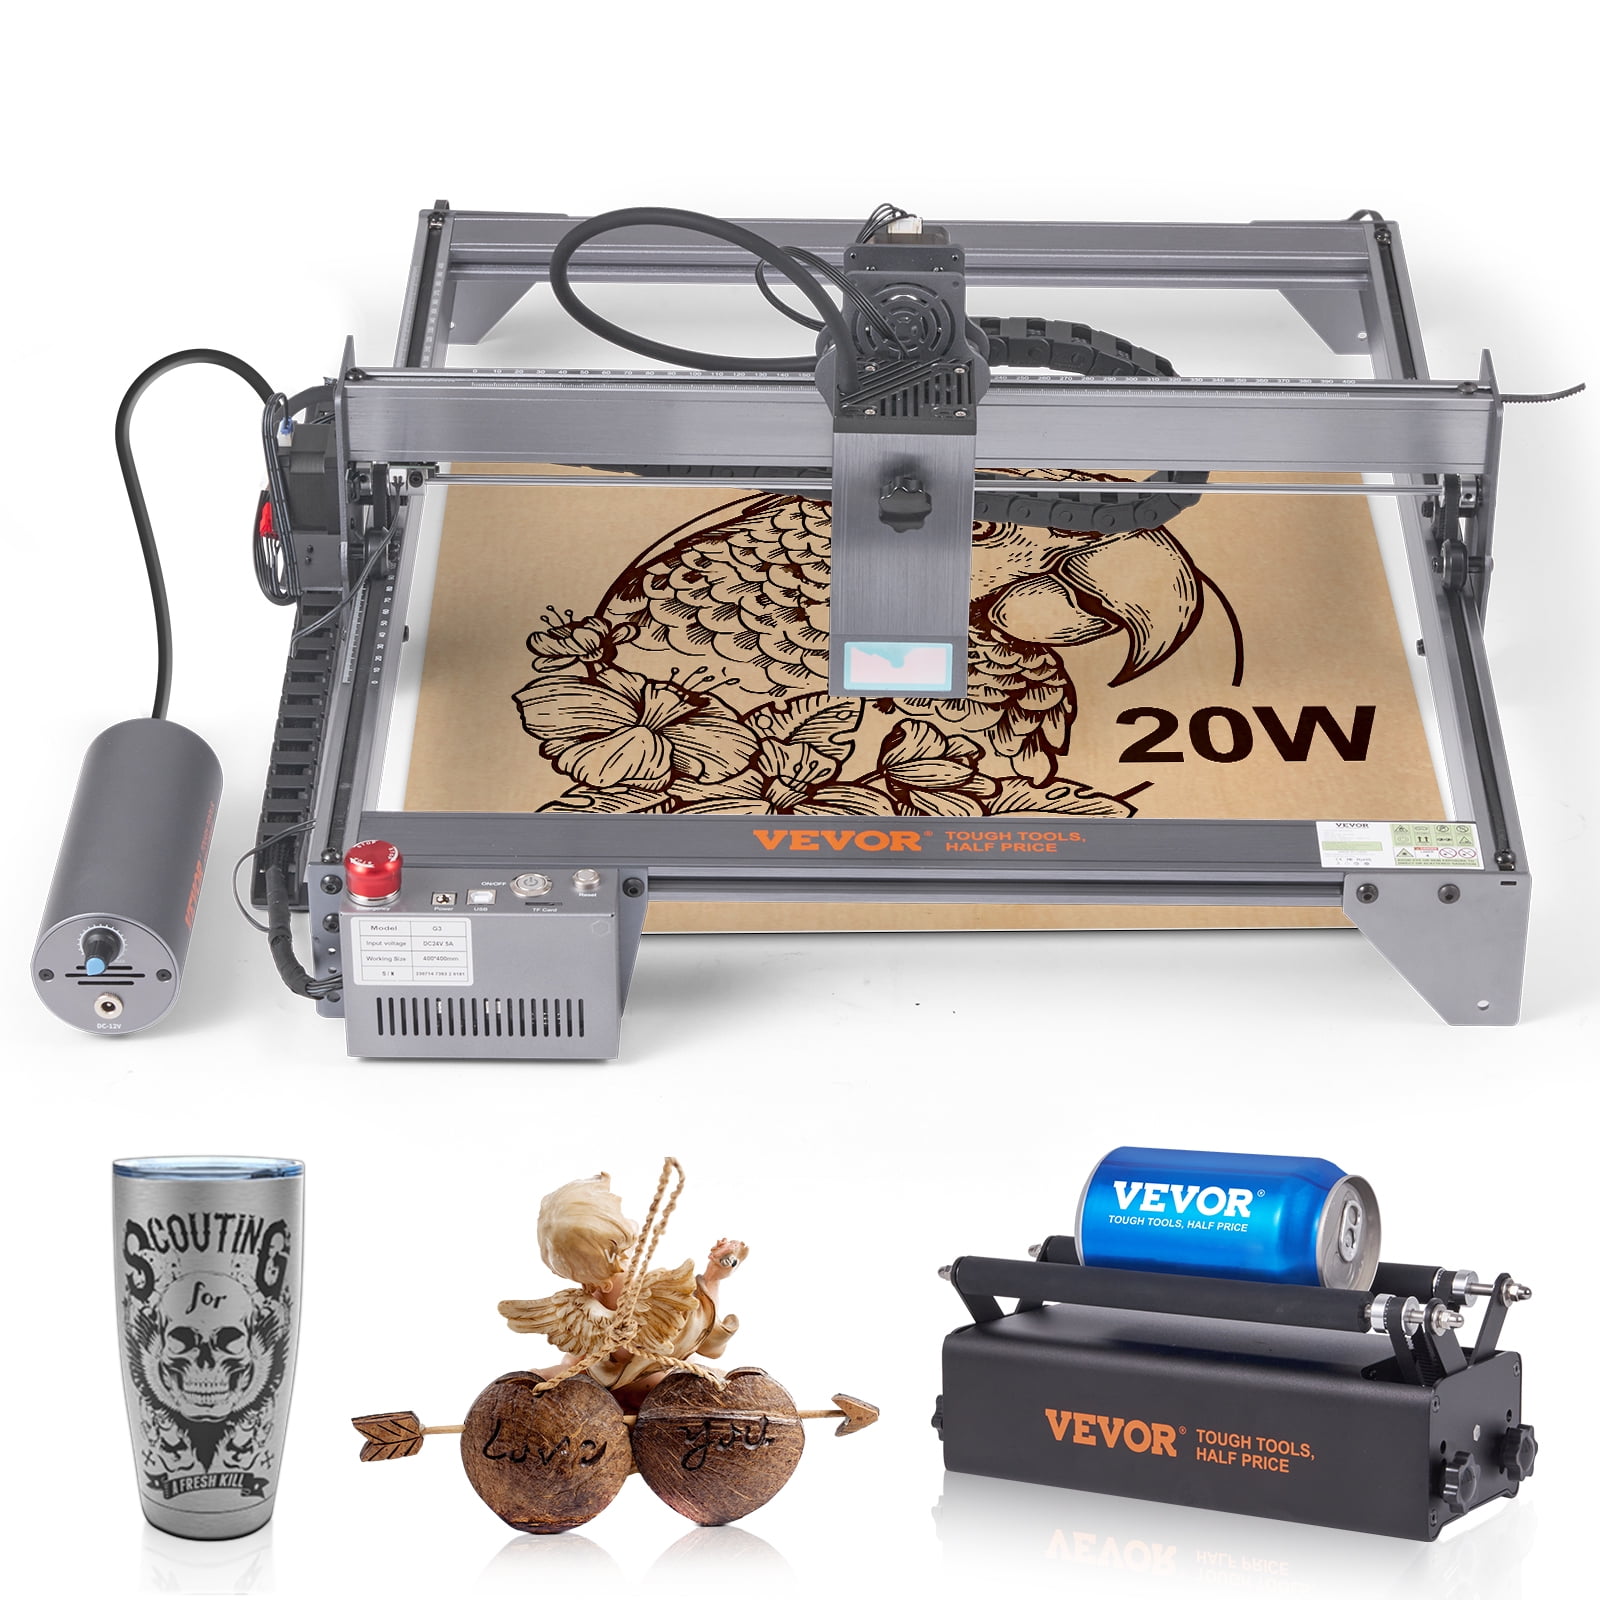 xTool D1 Pro 60W Updated Laser Engraver and Cutter, 10W Output Power 0.06mm Ultra-Fine Compressed Spot High Accuracy Laser Cutting Engraving Machine